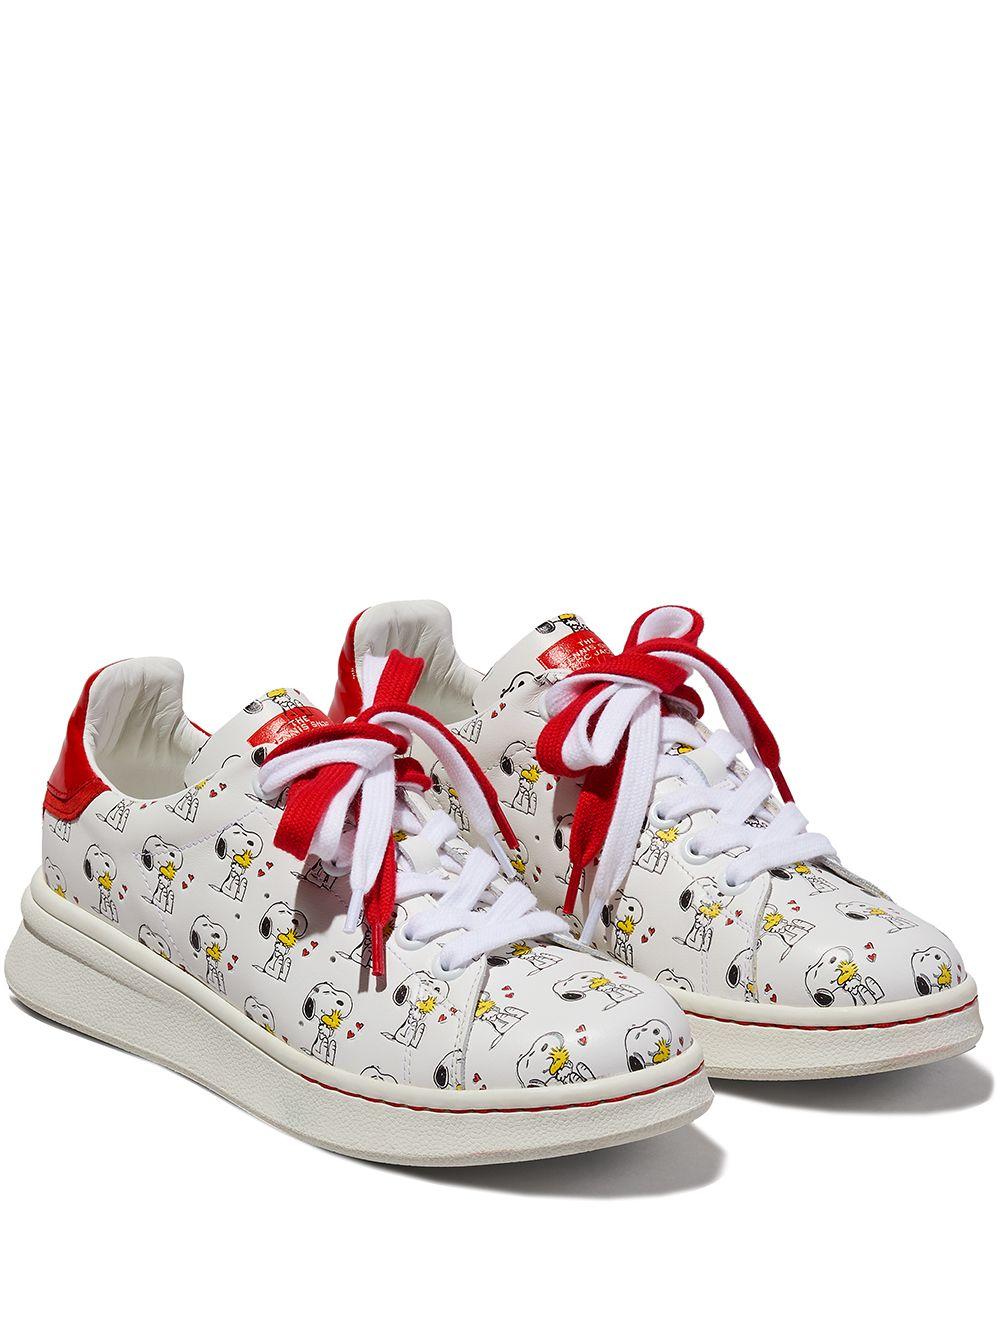 Marc Jacobs X Peanuts The Tennis Shoe Sneakers in White (Red) - Lyst